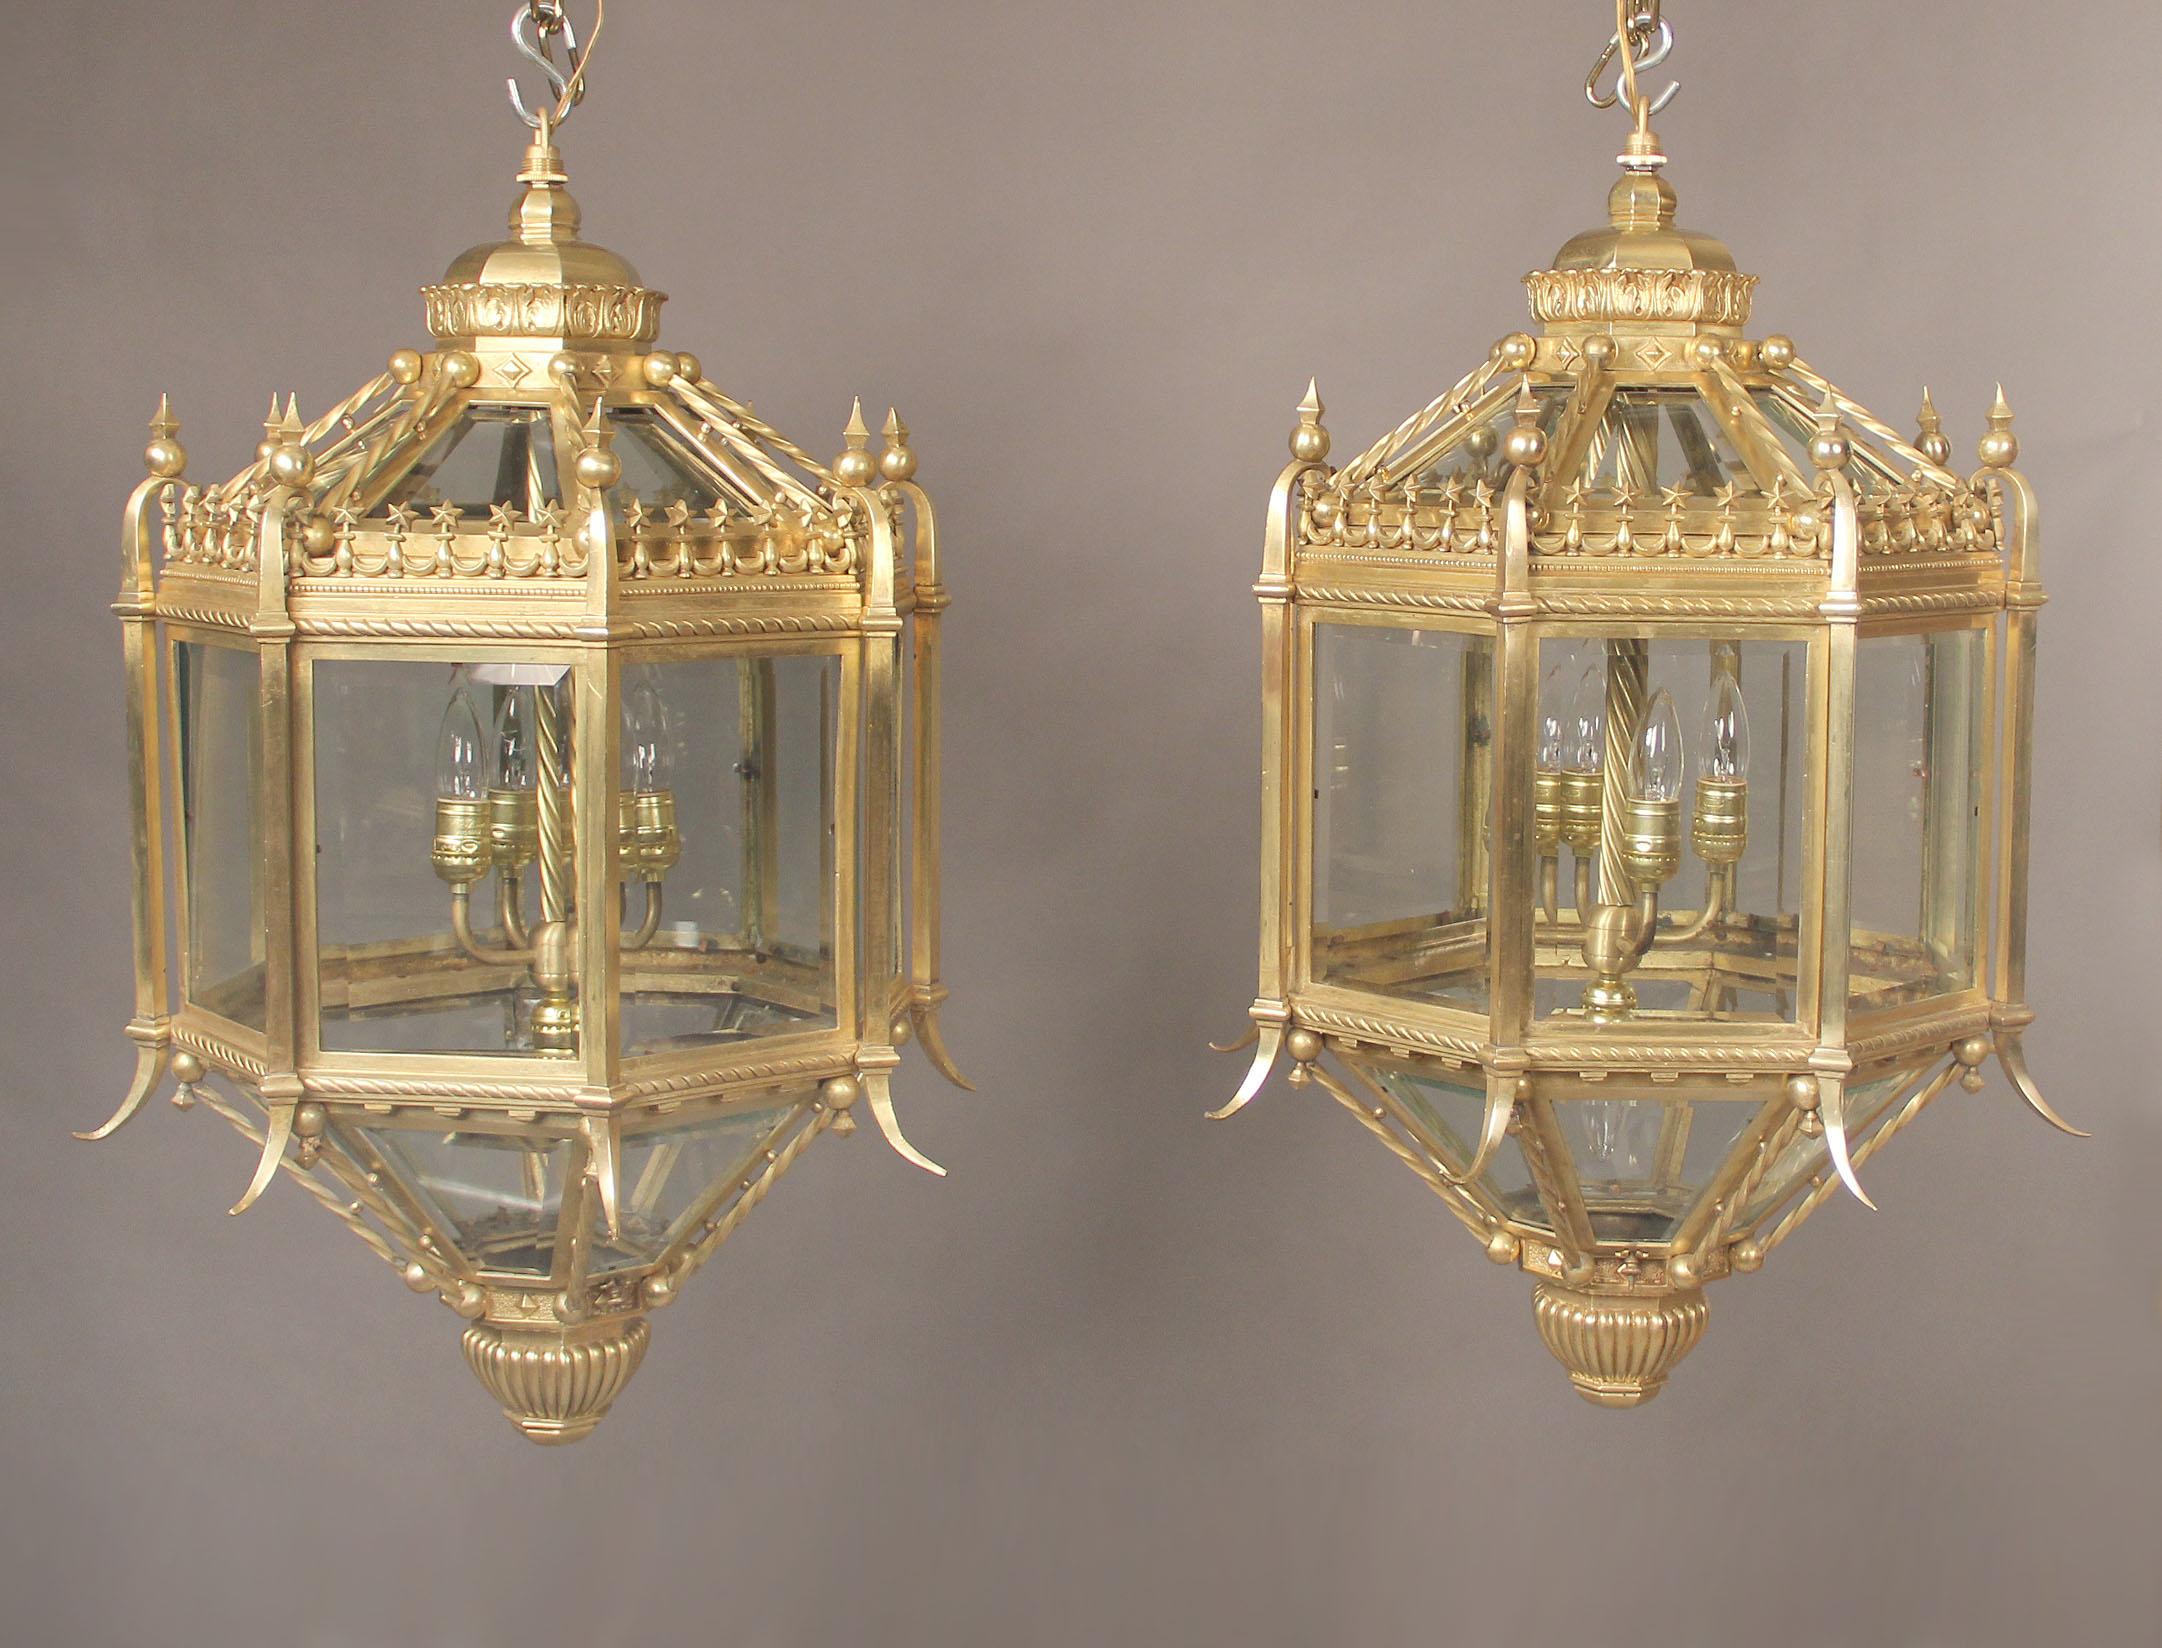 A fine pair of late 19th century gilt bronze five-light lanterns.

The lanterns of octagonal form with a pieced gallery with stars circling the top. Five interior lights.

